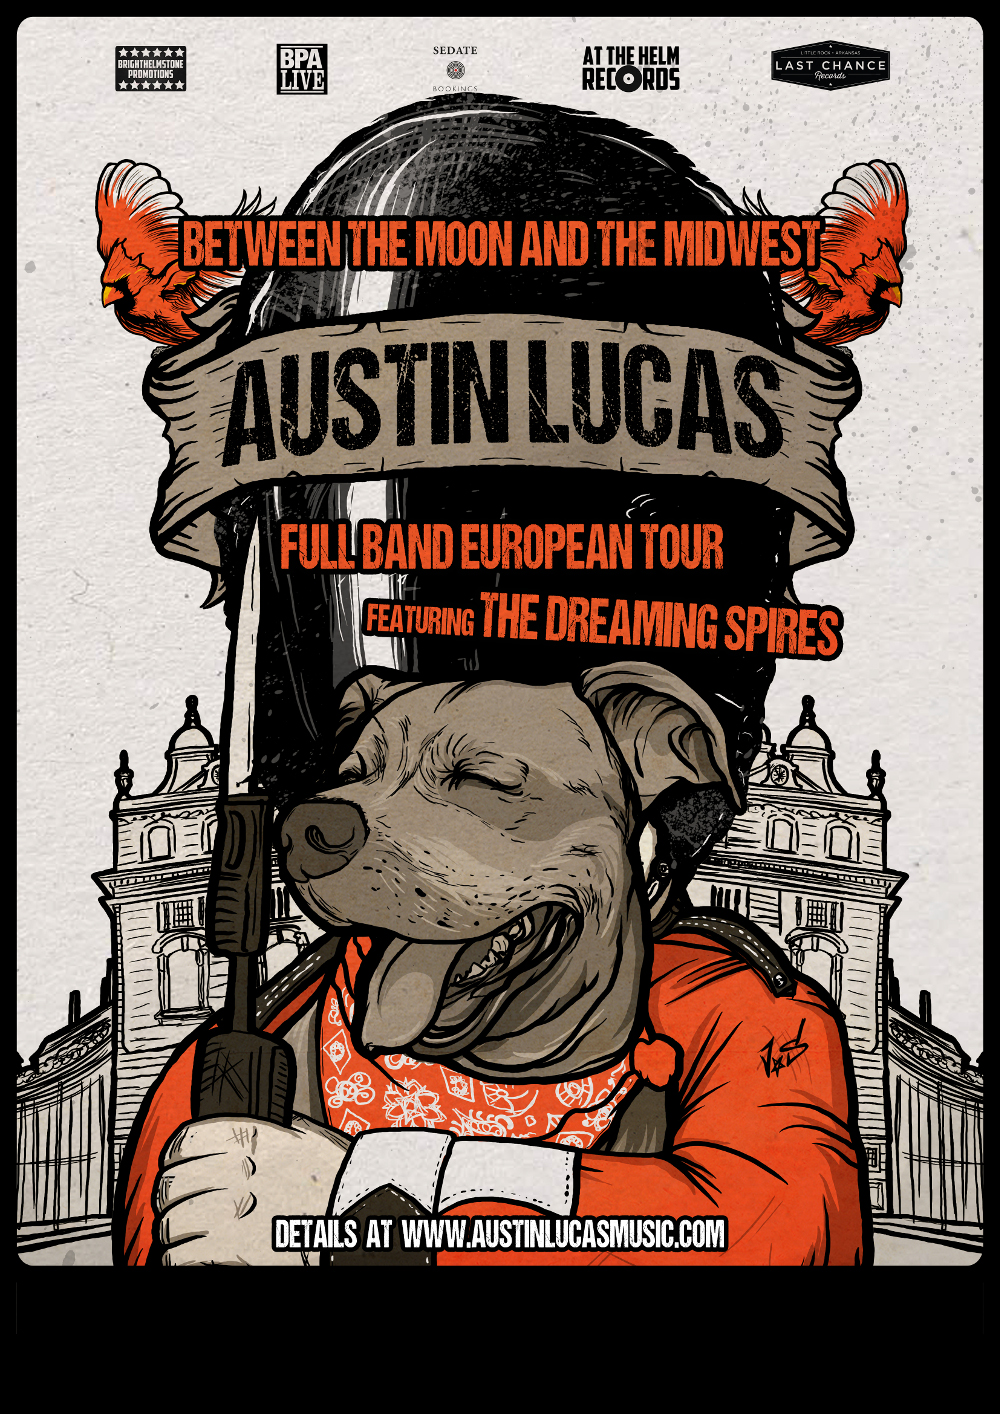 Austin Lucas + The Dreaming Spires tour Europe starting this weekend